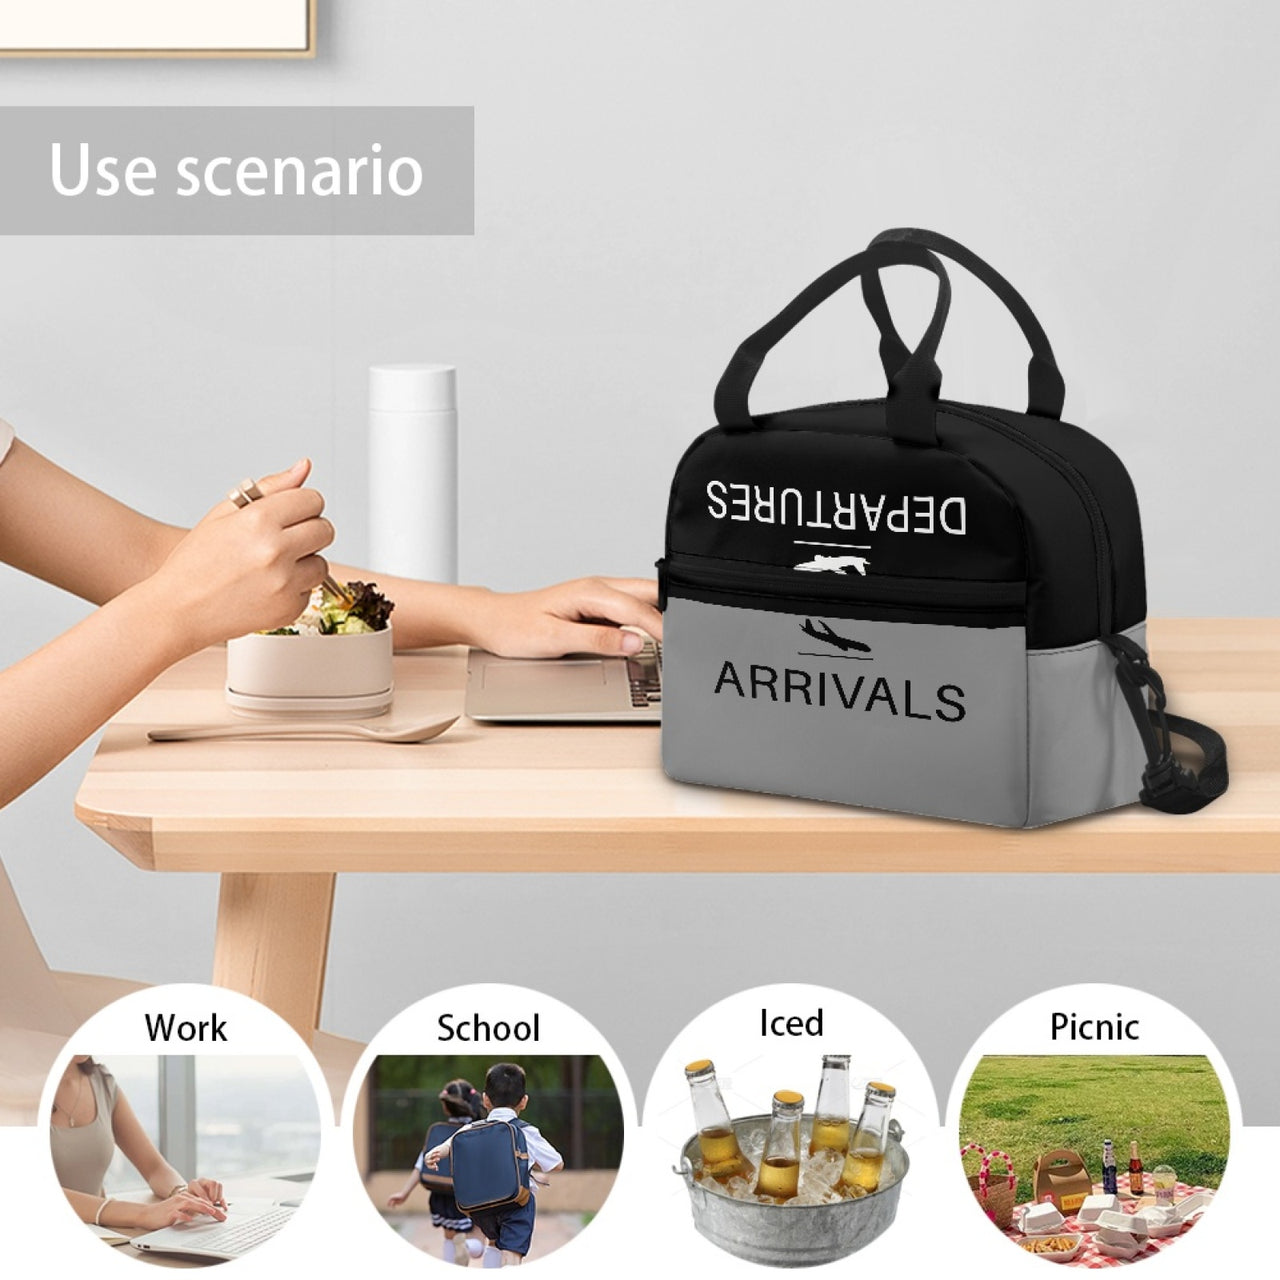 Arrival & Departures(Gray) Designed Lunch Bags